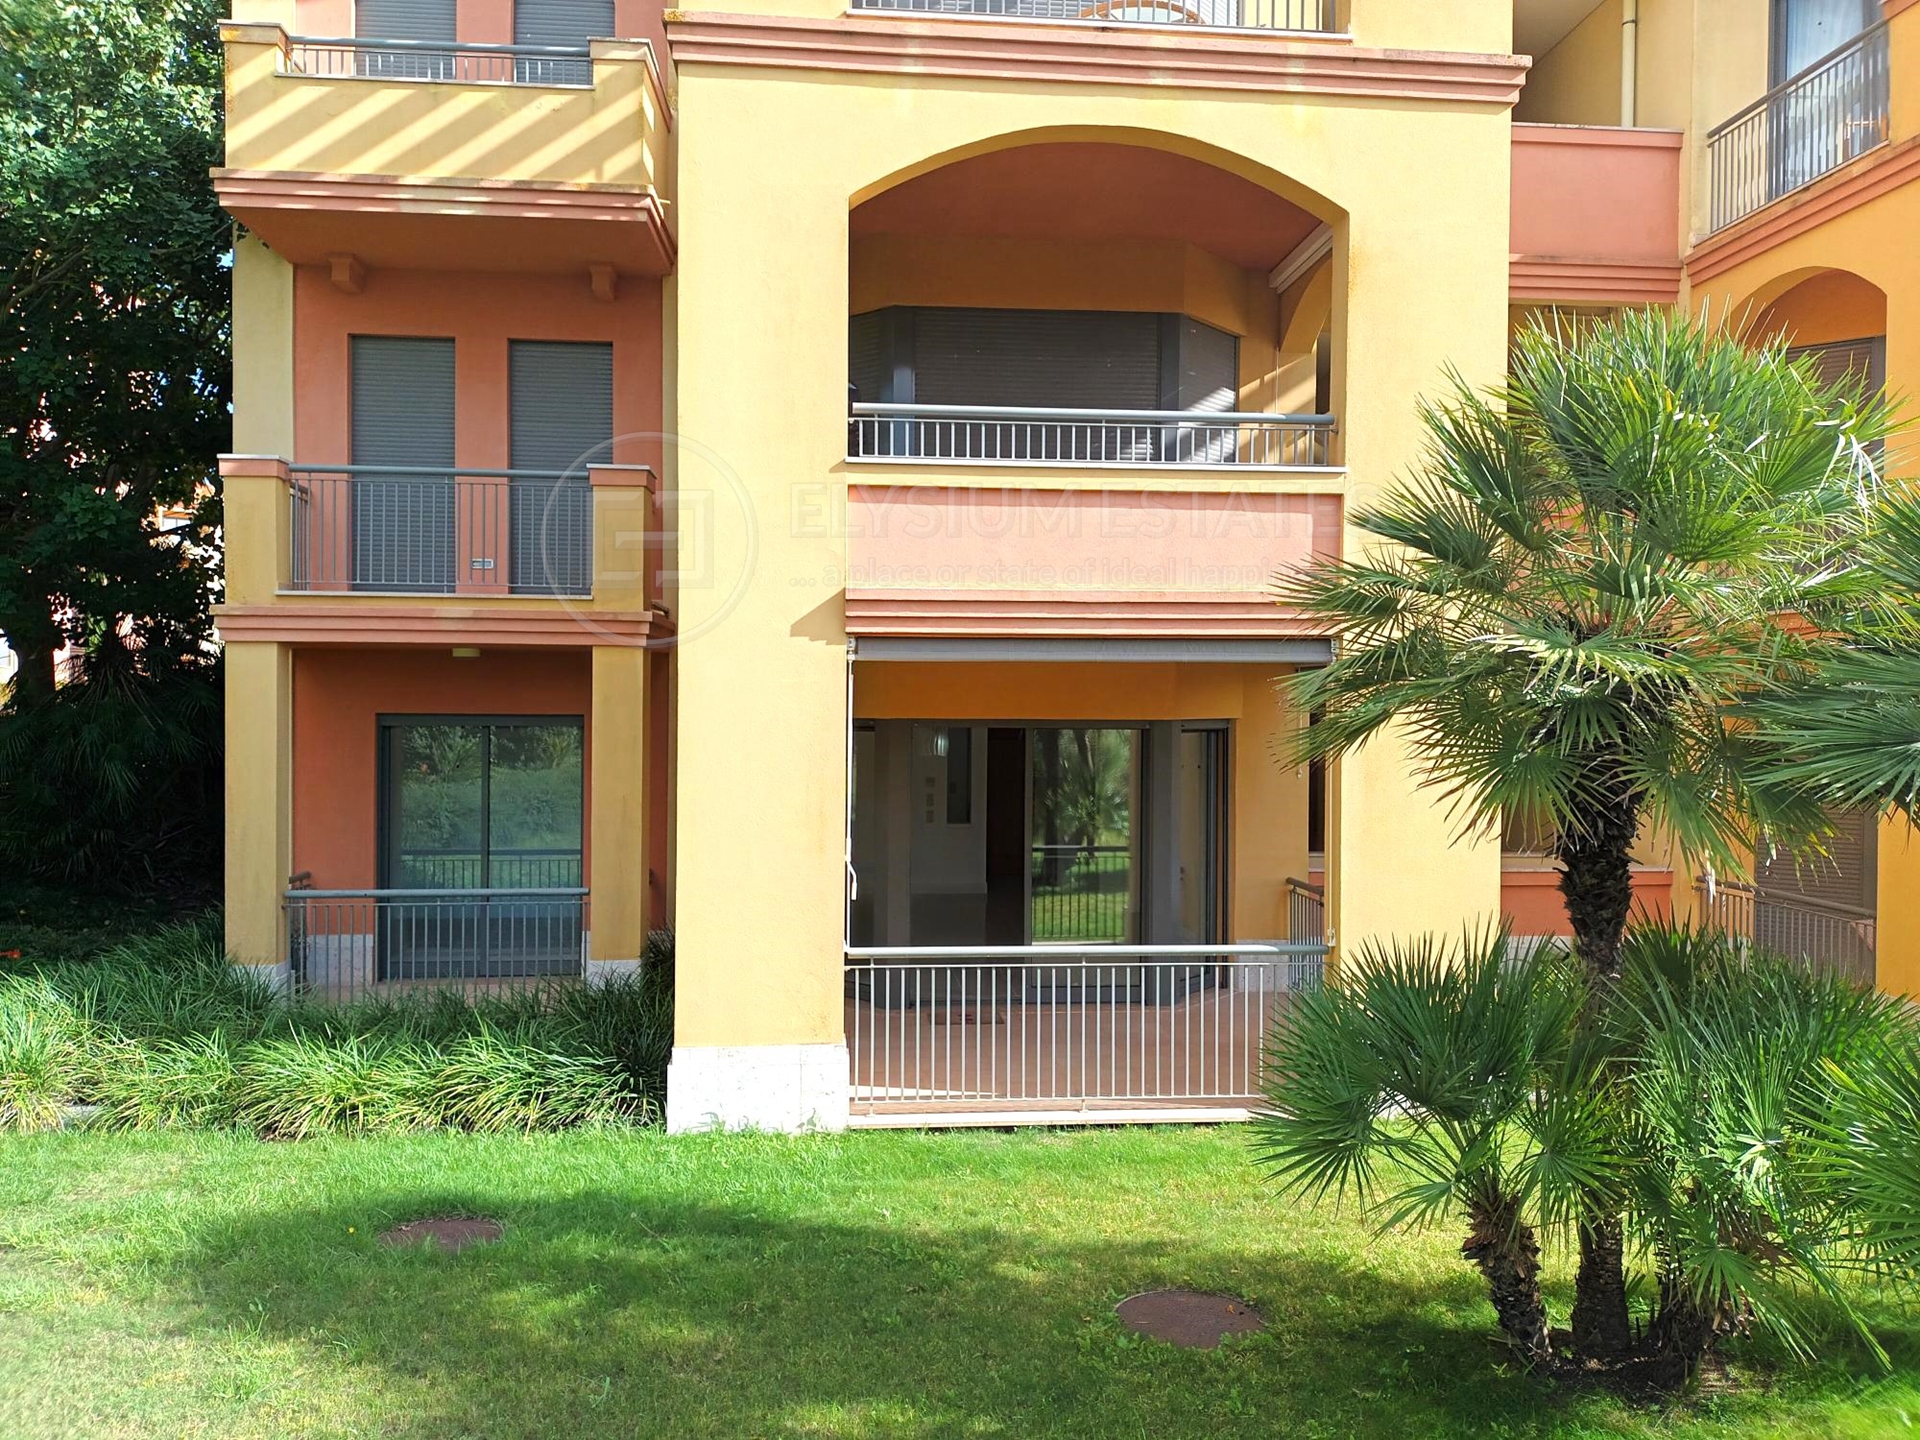 A0636 - 3 Bedroom Apartment close to Golf Course Vilamoura